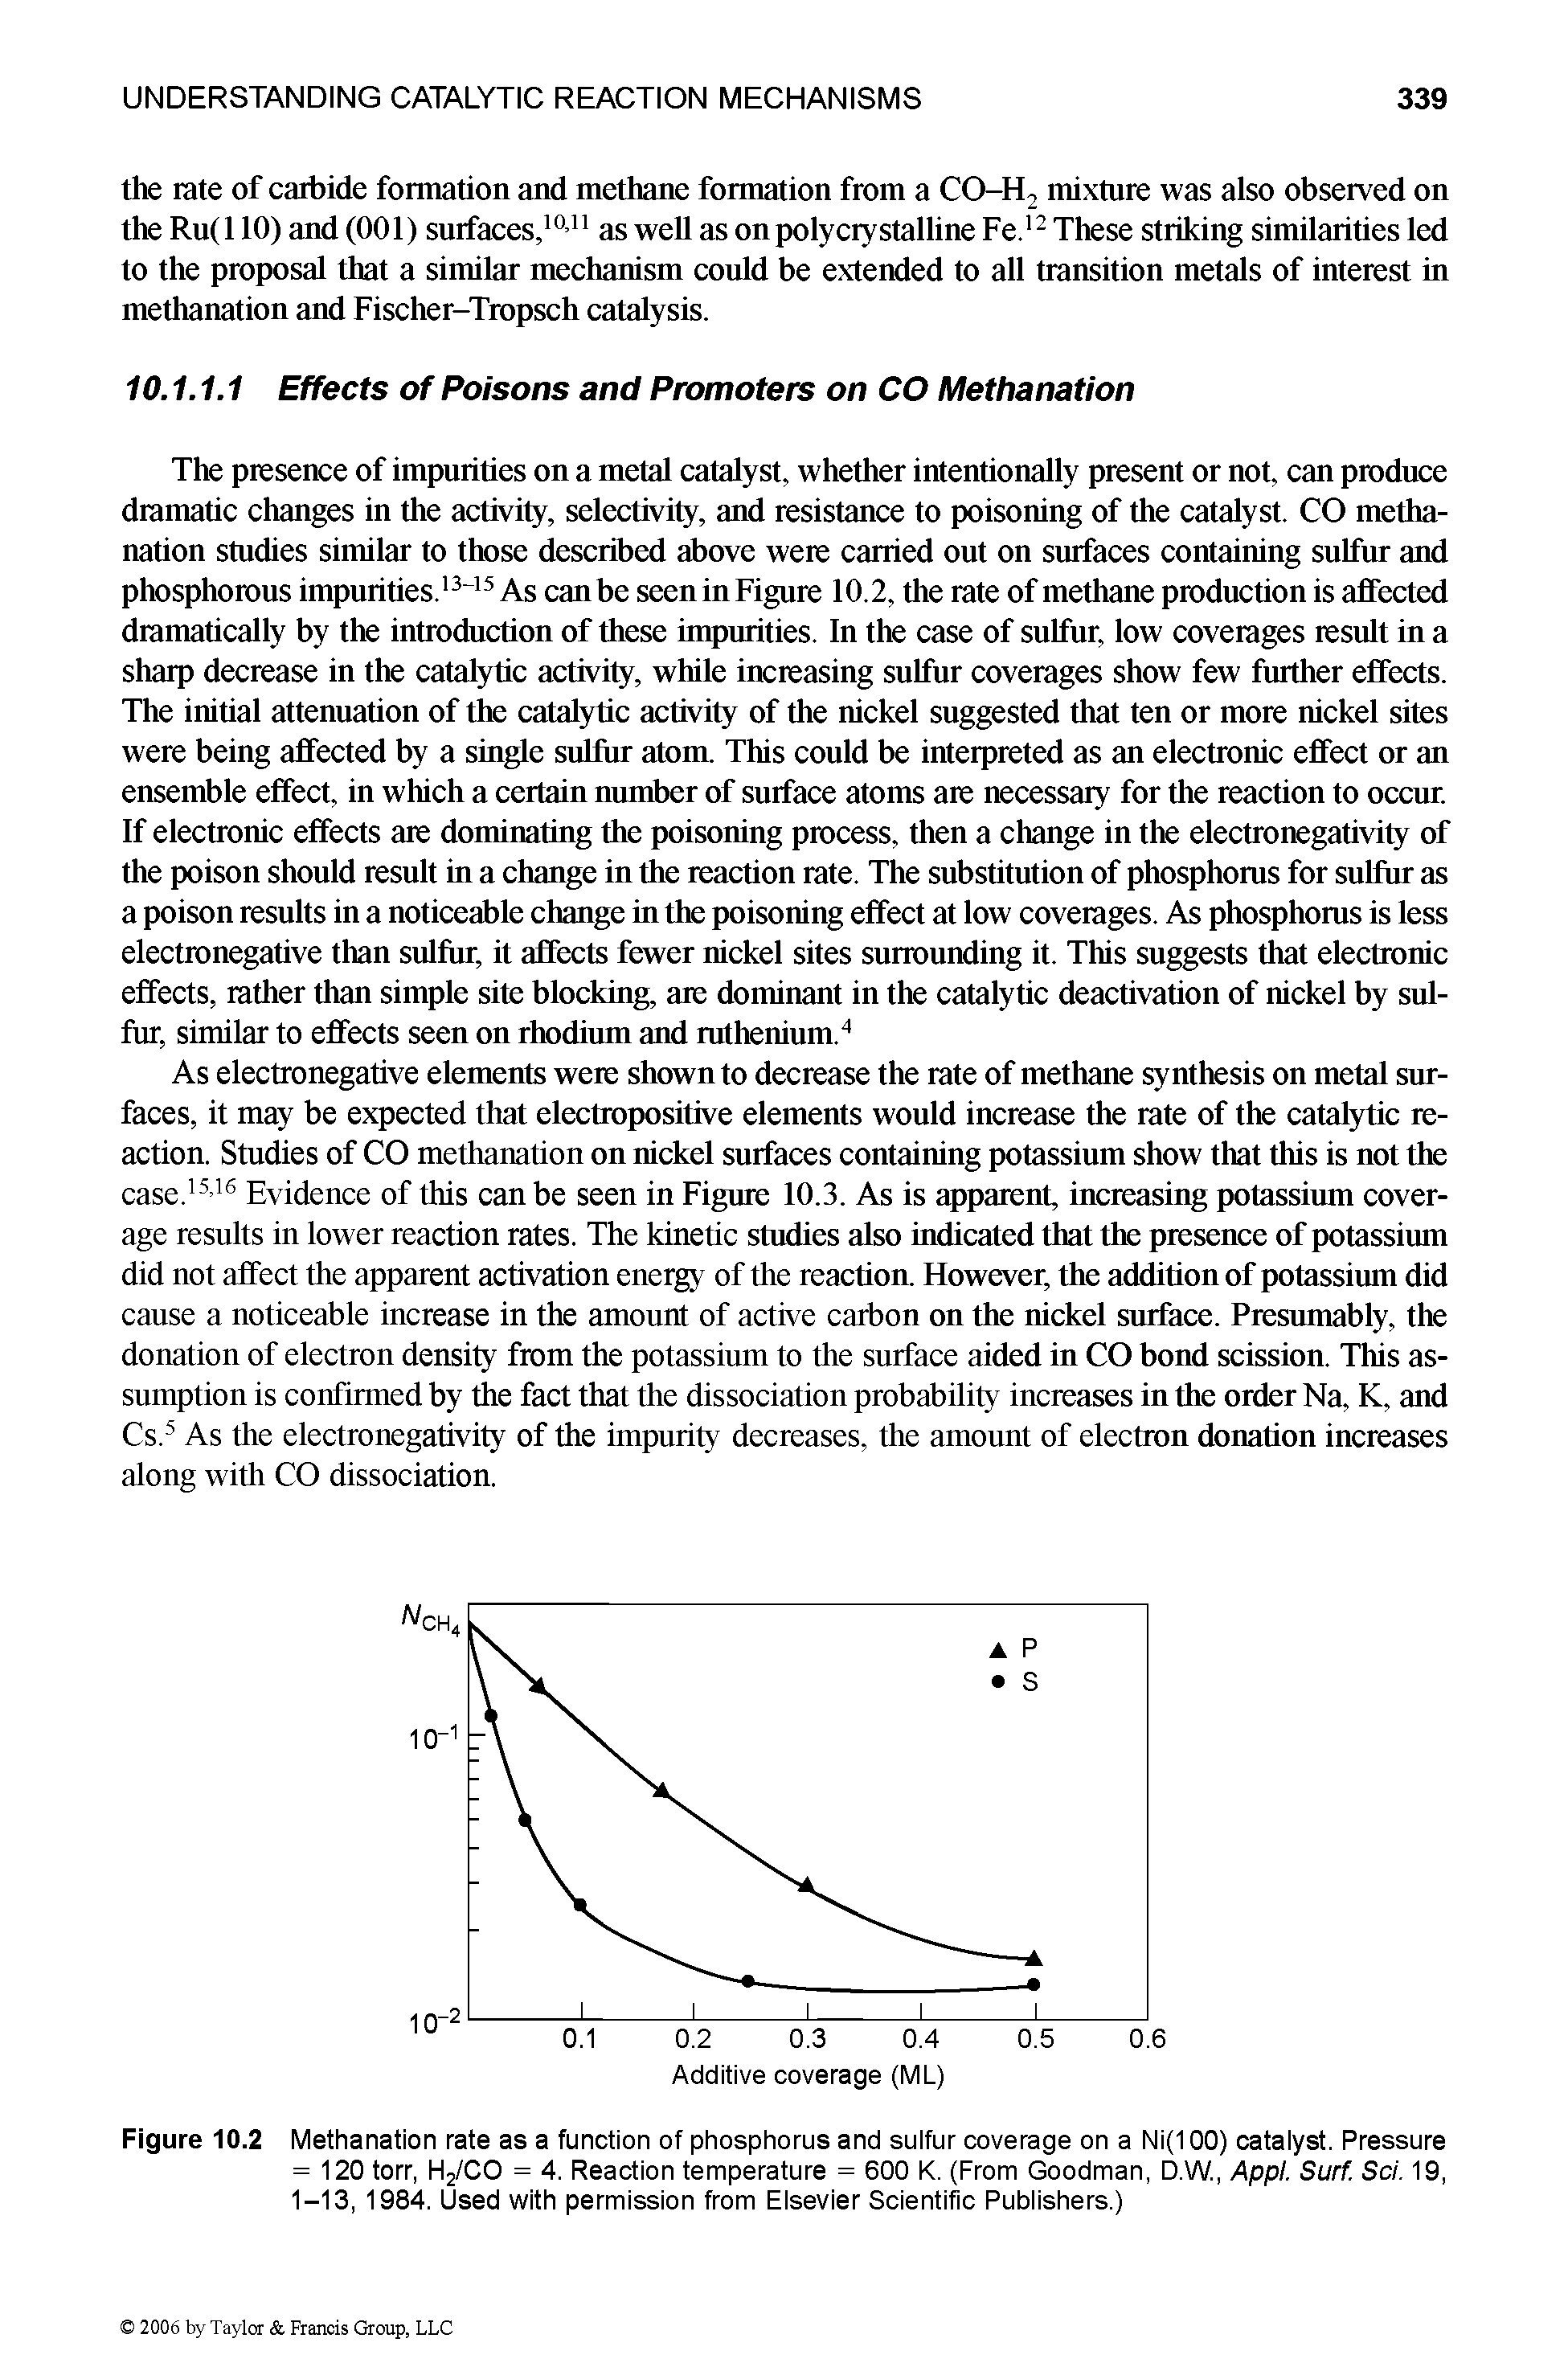 Figure 10.2 Methanation rate as a function of phosphorus and sulfur coverage on a Ni(100) catalyst. Pressure = 120 torr, H2/CO = 4. Reaction temperature = 600 K. (From Goodman, D.W., Appl. Surf. Sci. 19, 1-13, 1984. Used with permission from Elsevier Scientific Publishers.)...